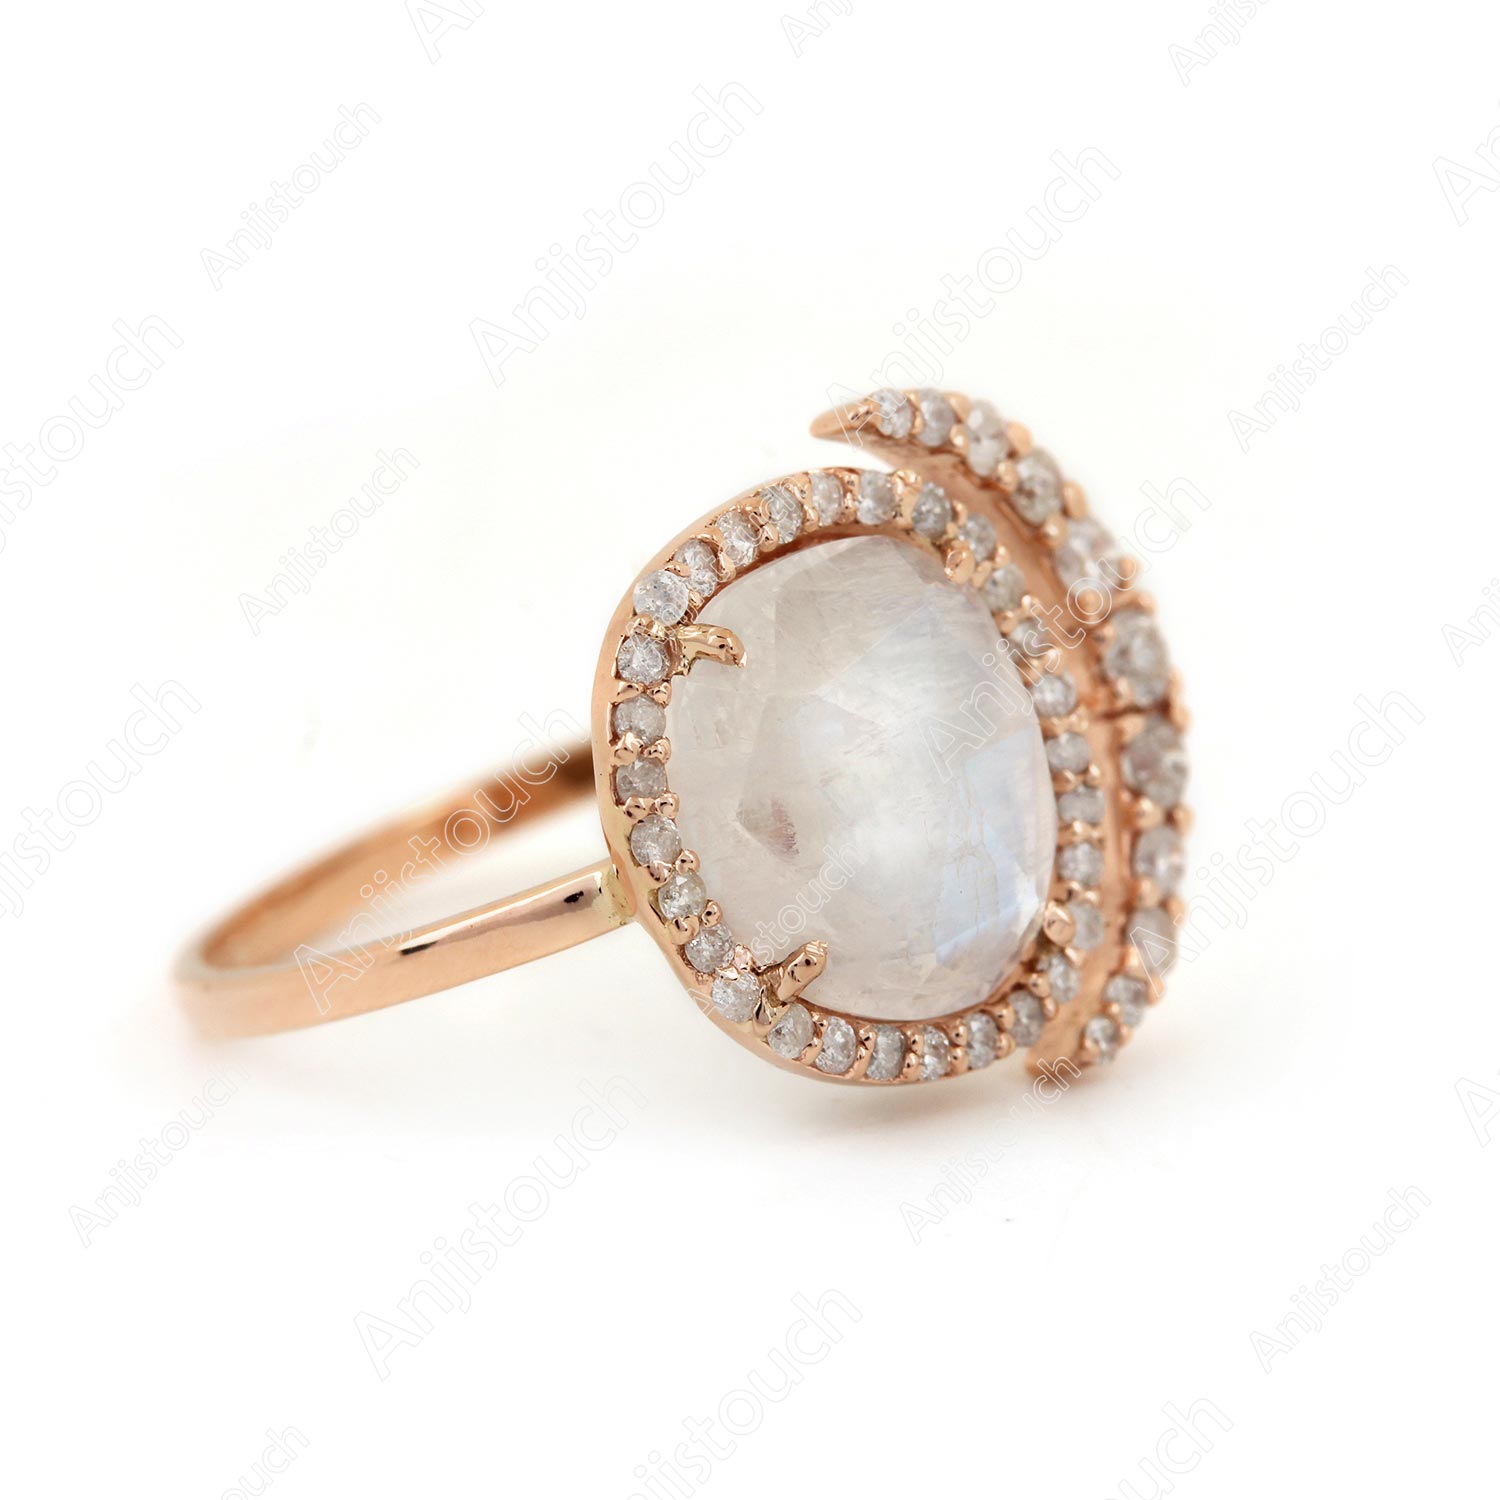 Moonstone 14K Solid Gold Crescent Moon Style Ring Pave Diamond Jewelry